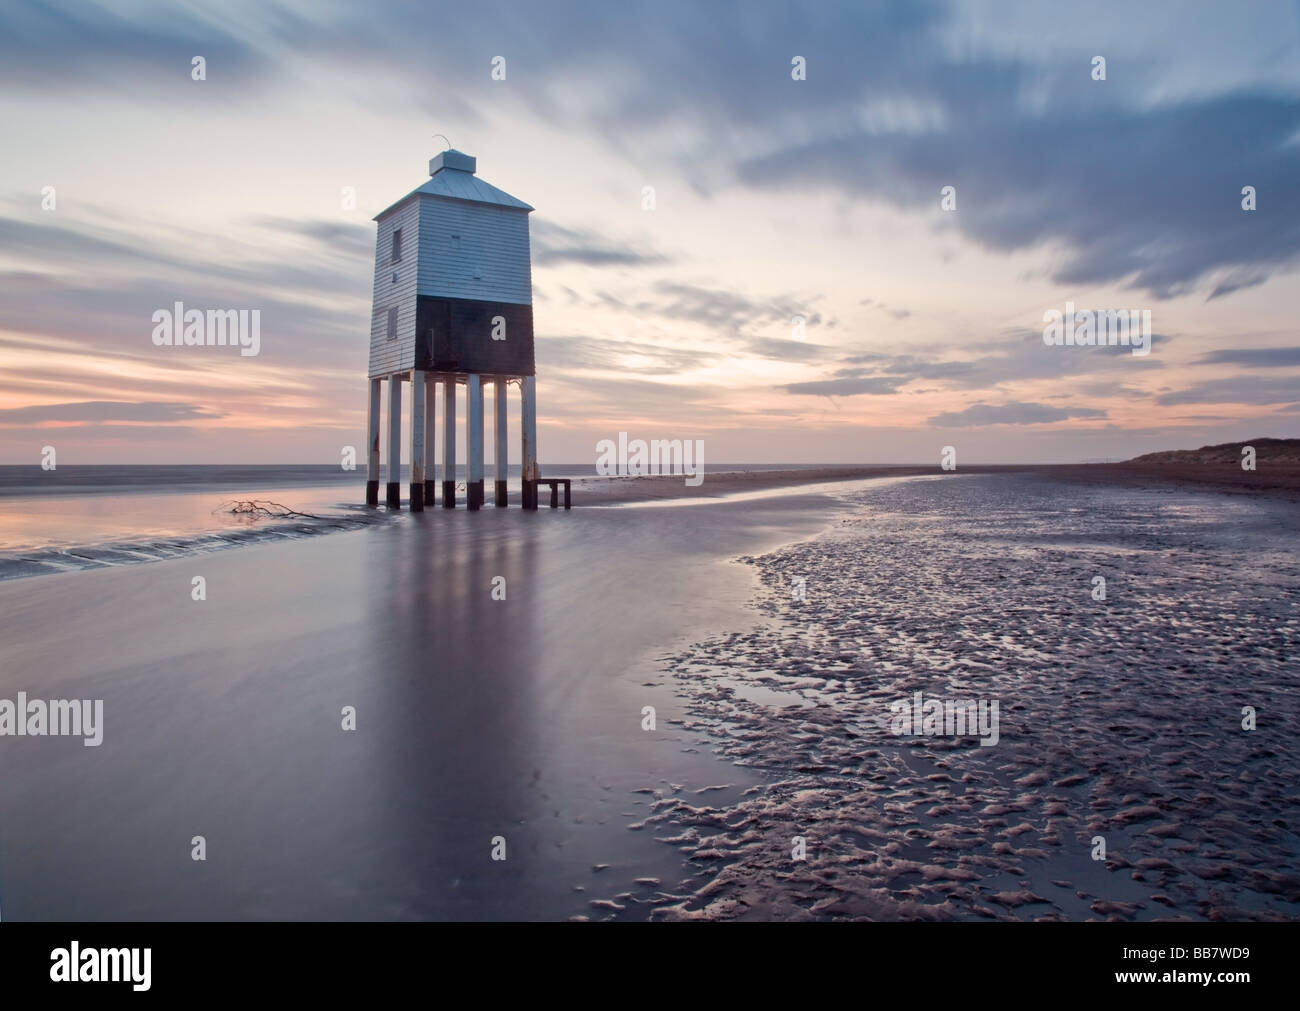 Atmospheric Image of The Lower Lighthouse at Burnham on Sea after Sunset. Stock Photo